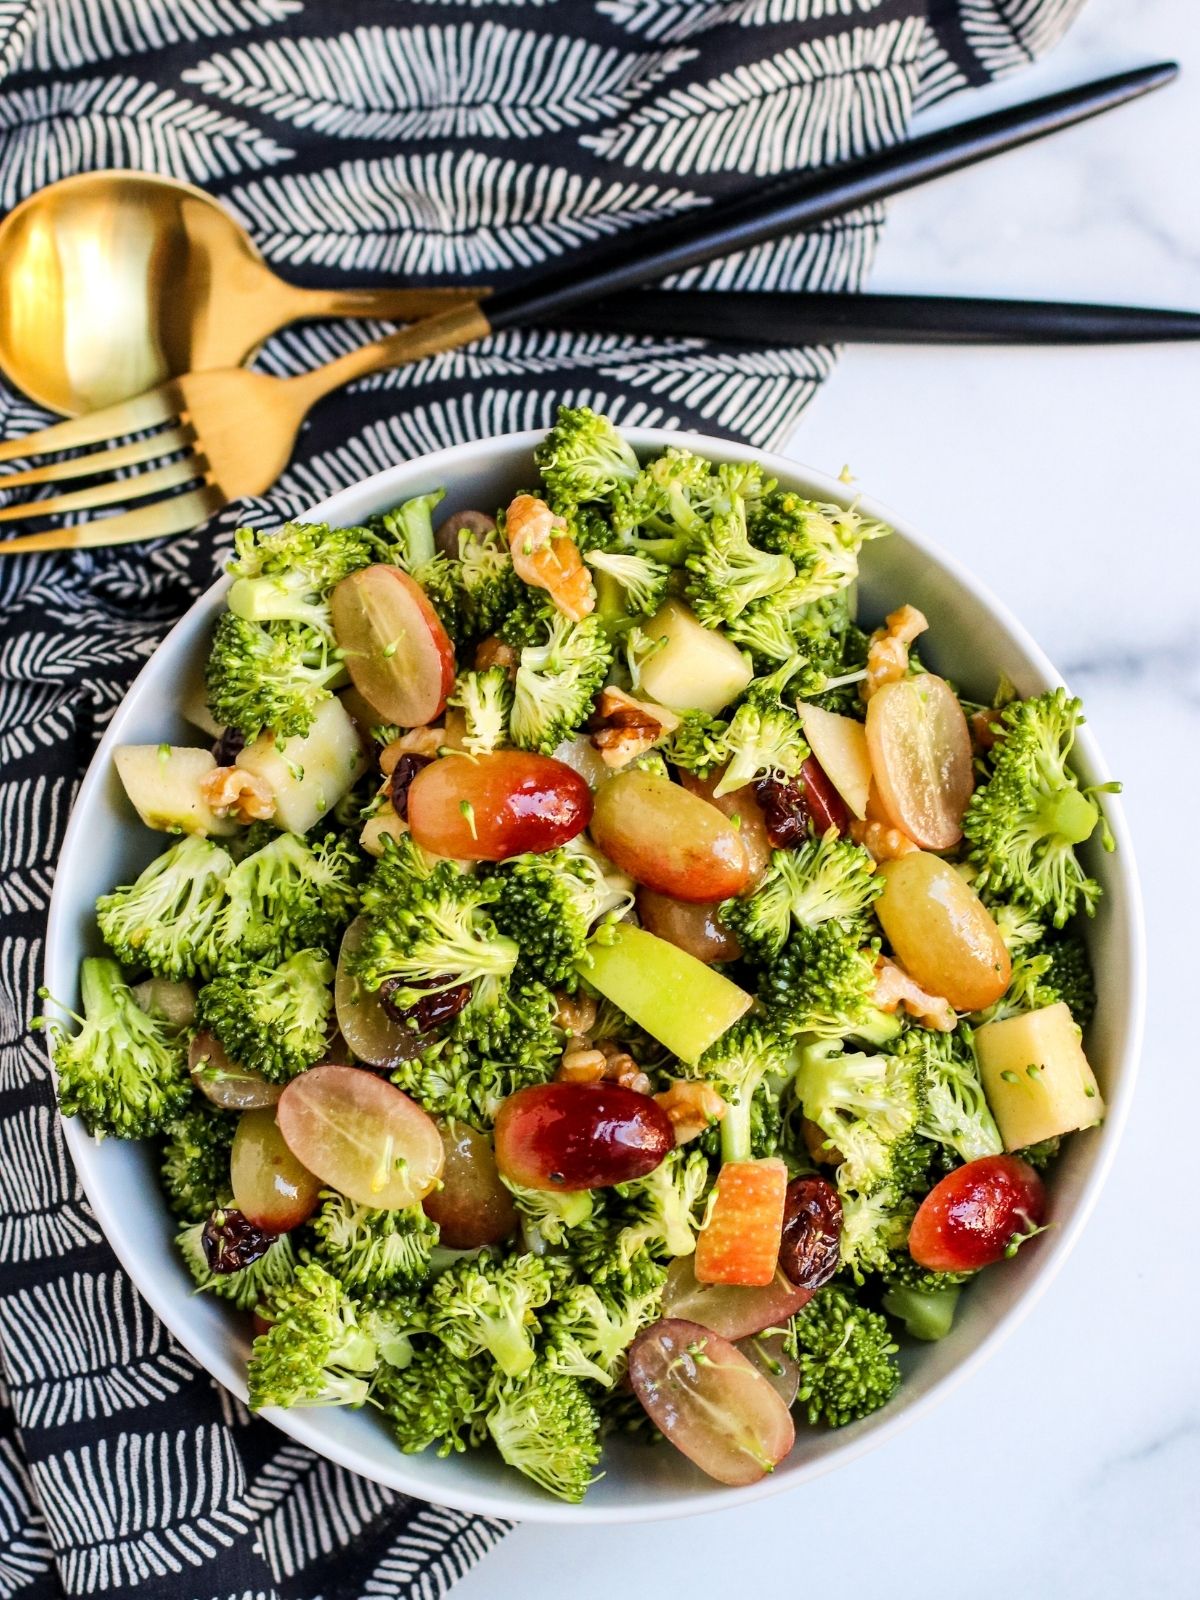 Overhead of bowl of broccoli grape salad with serving utensils.